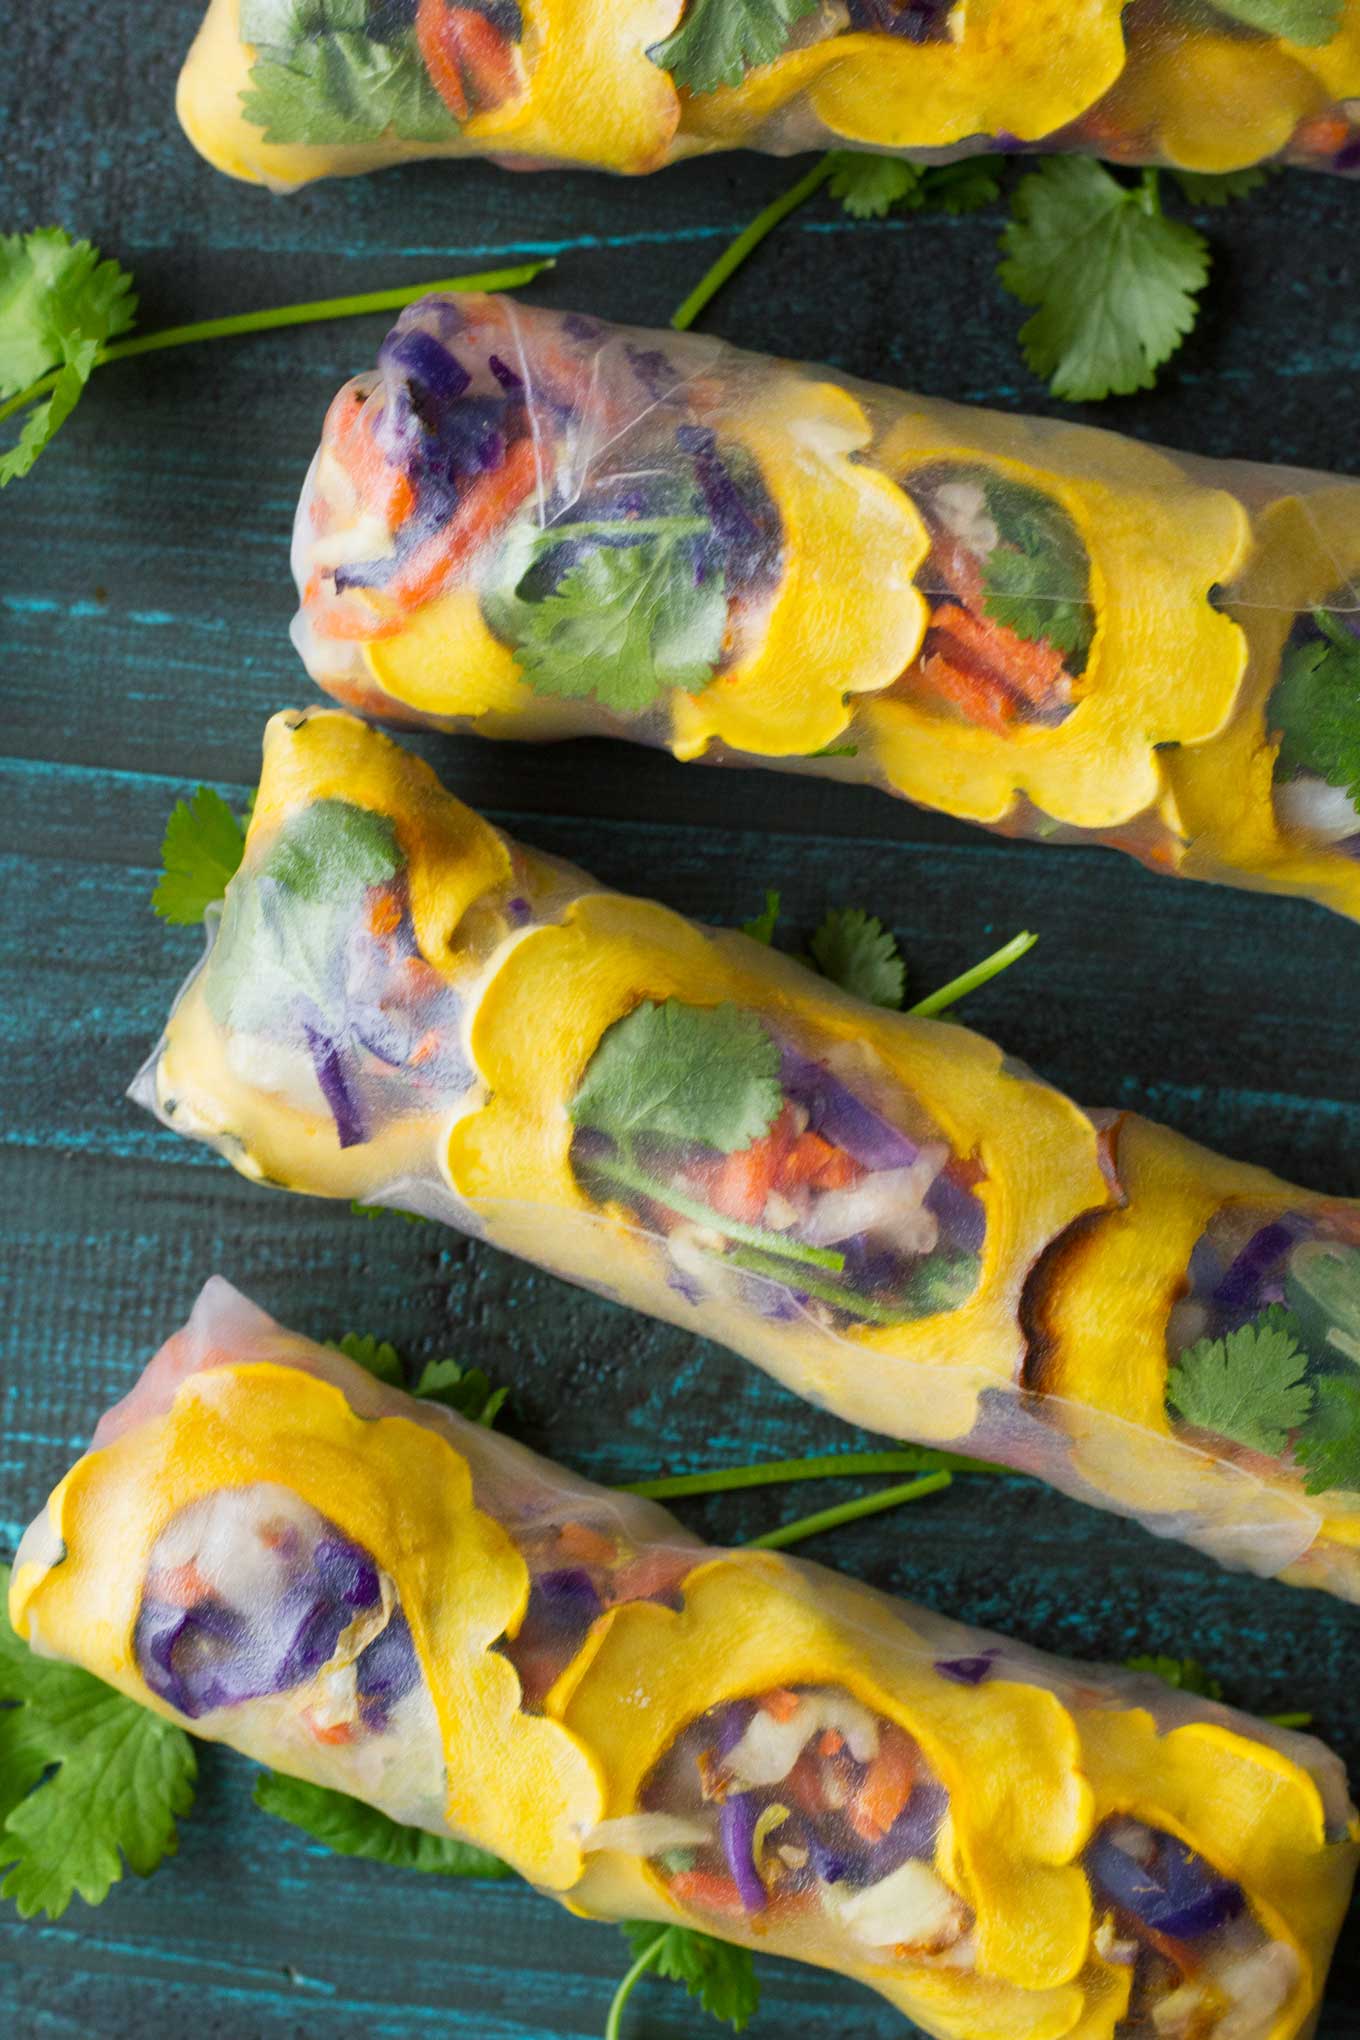 Rice paper rolls filled with yellow delicata squash slices, and other red purple and green ingredients.